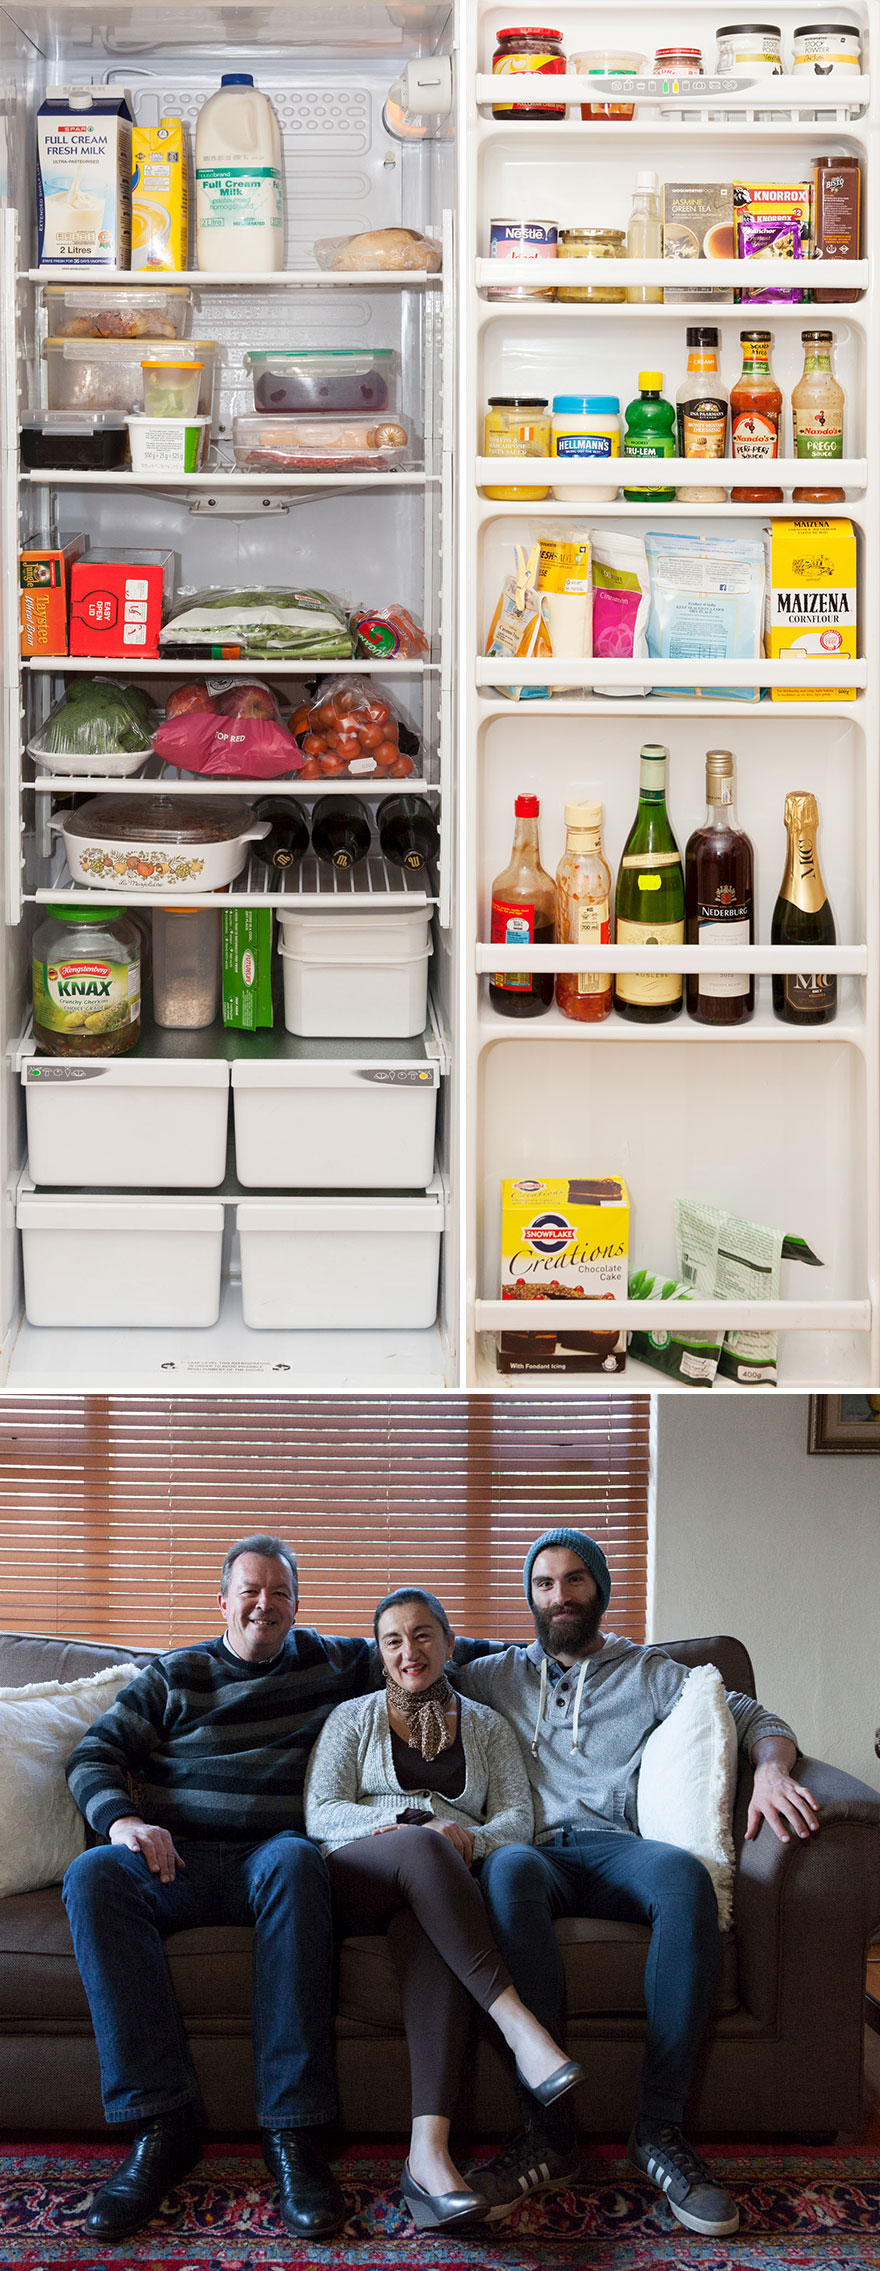 photography-project-show-me-your-fridge-sandra-junkers-102-5f3aaa523dfb2__880.jpg